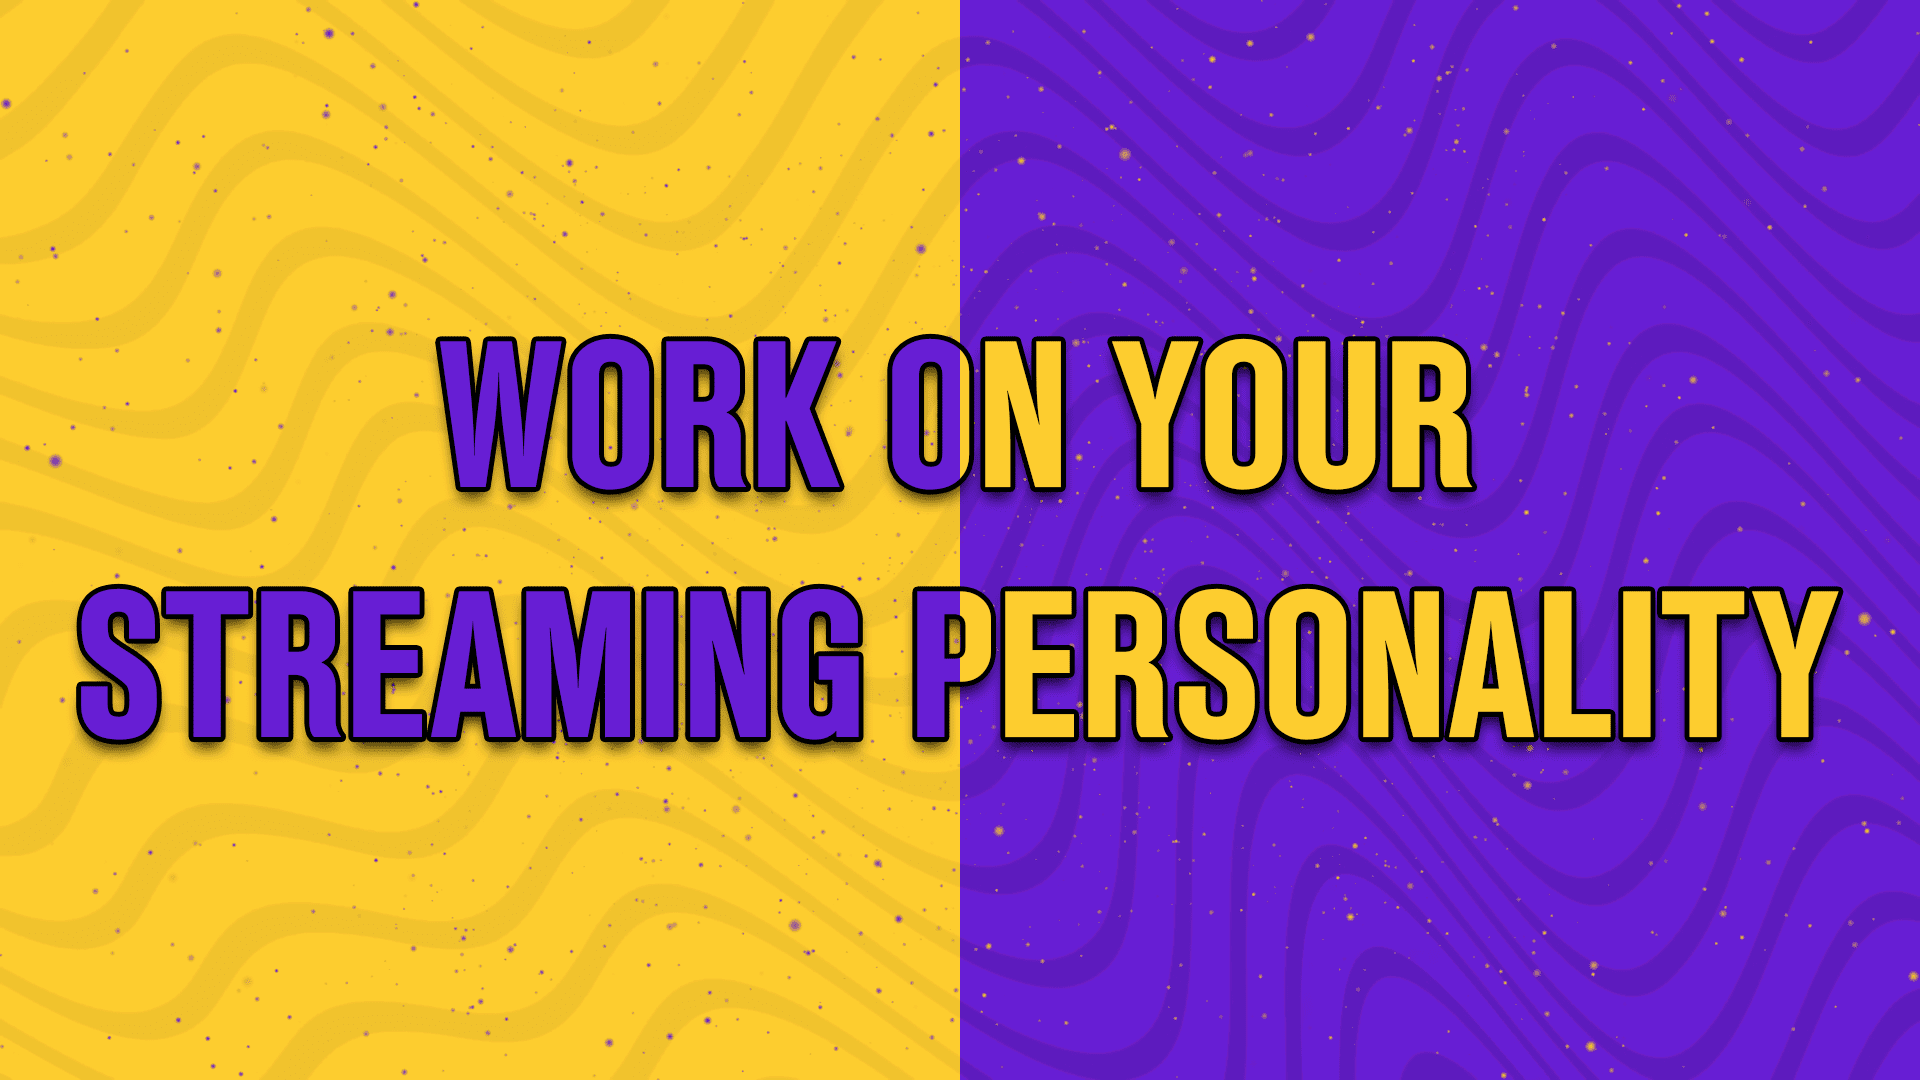 Work on your streaming personality - StreamBee